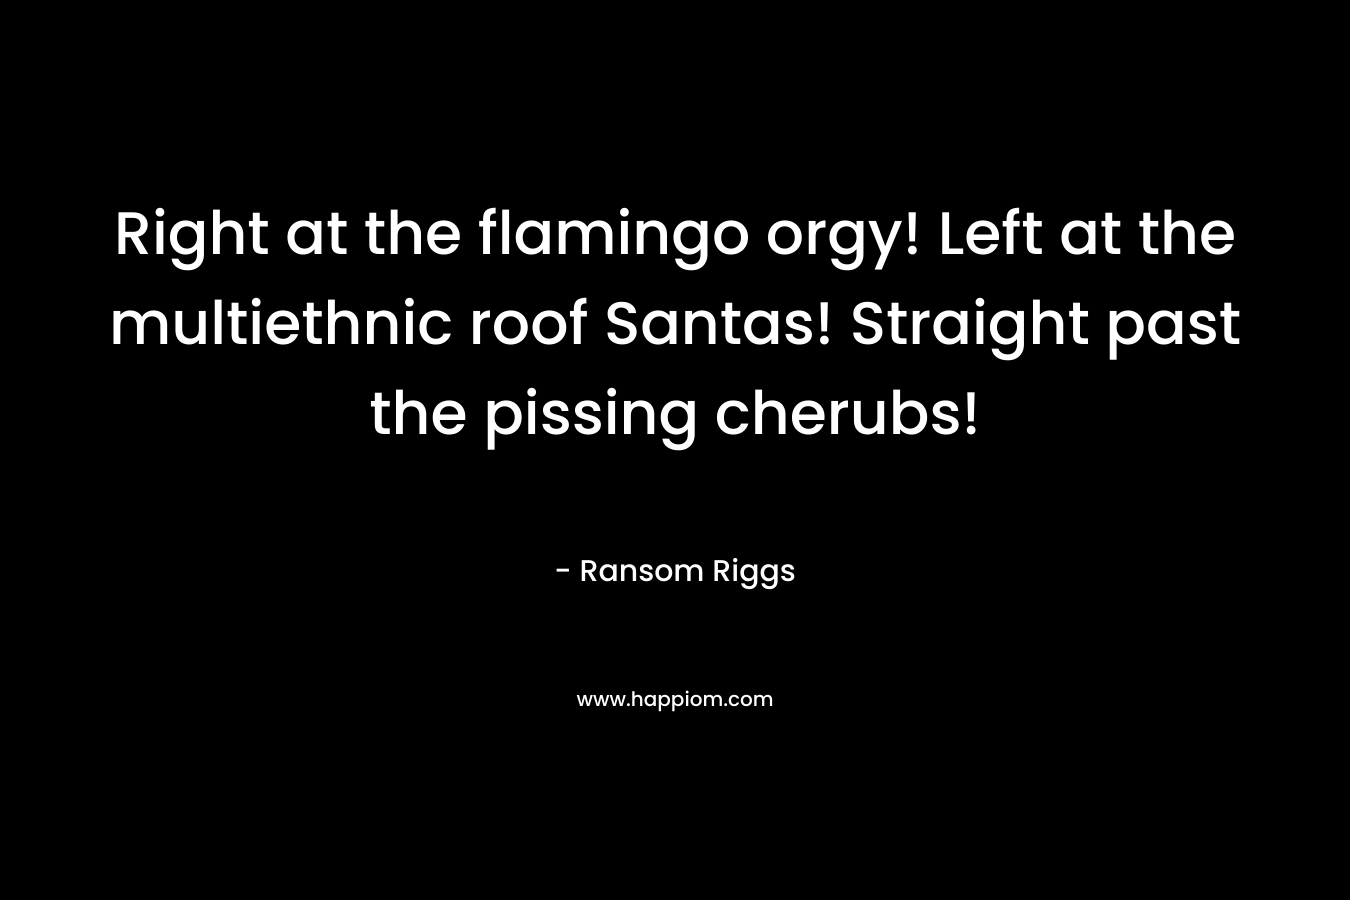 Right at the flamingo orgy! Left at the multiethnic roof Santas! Straight past the pissing cherubs! – Ransom Riggs